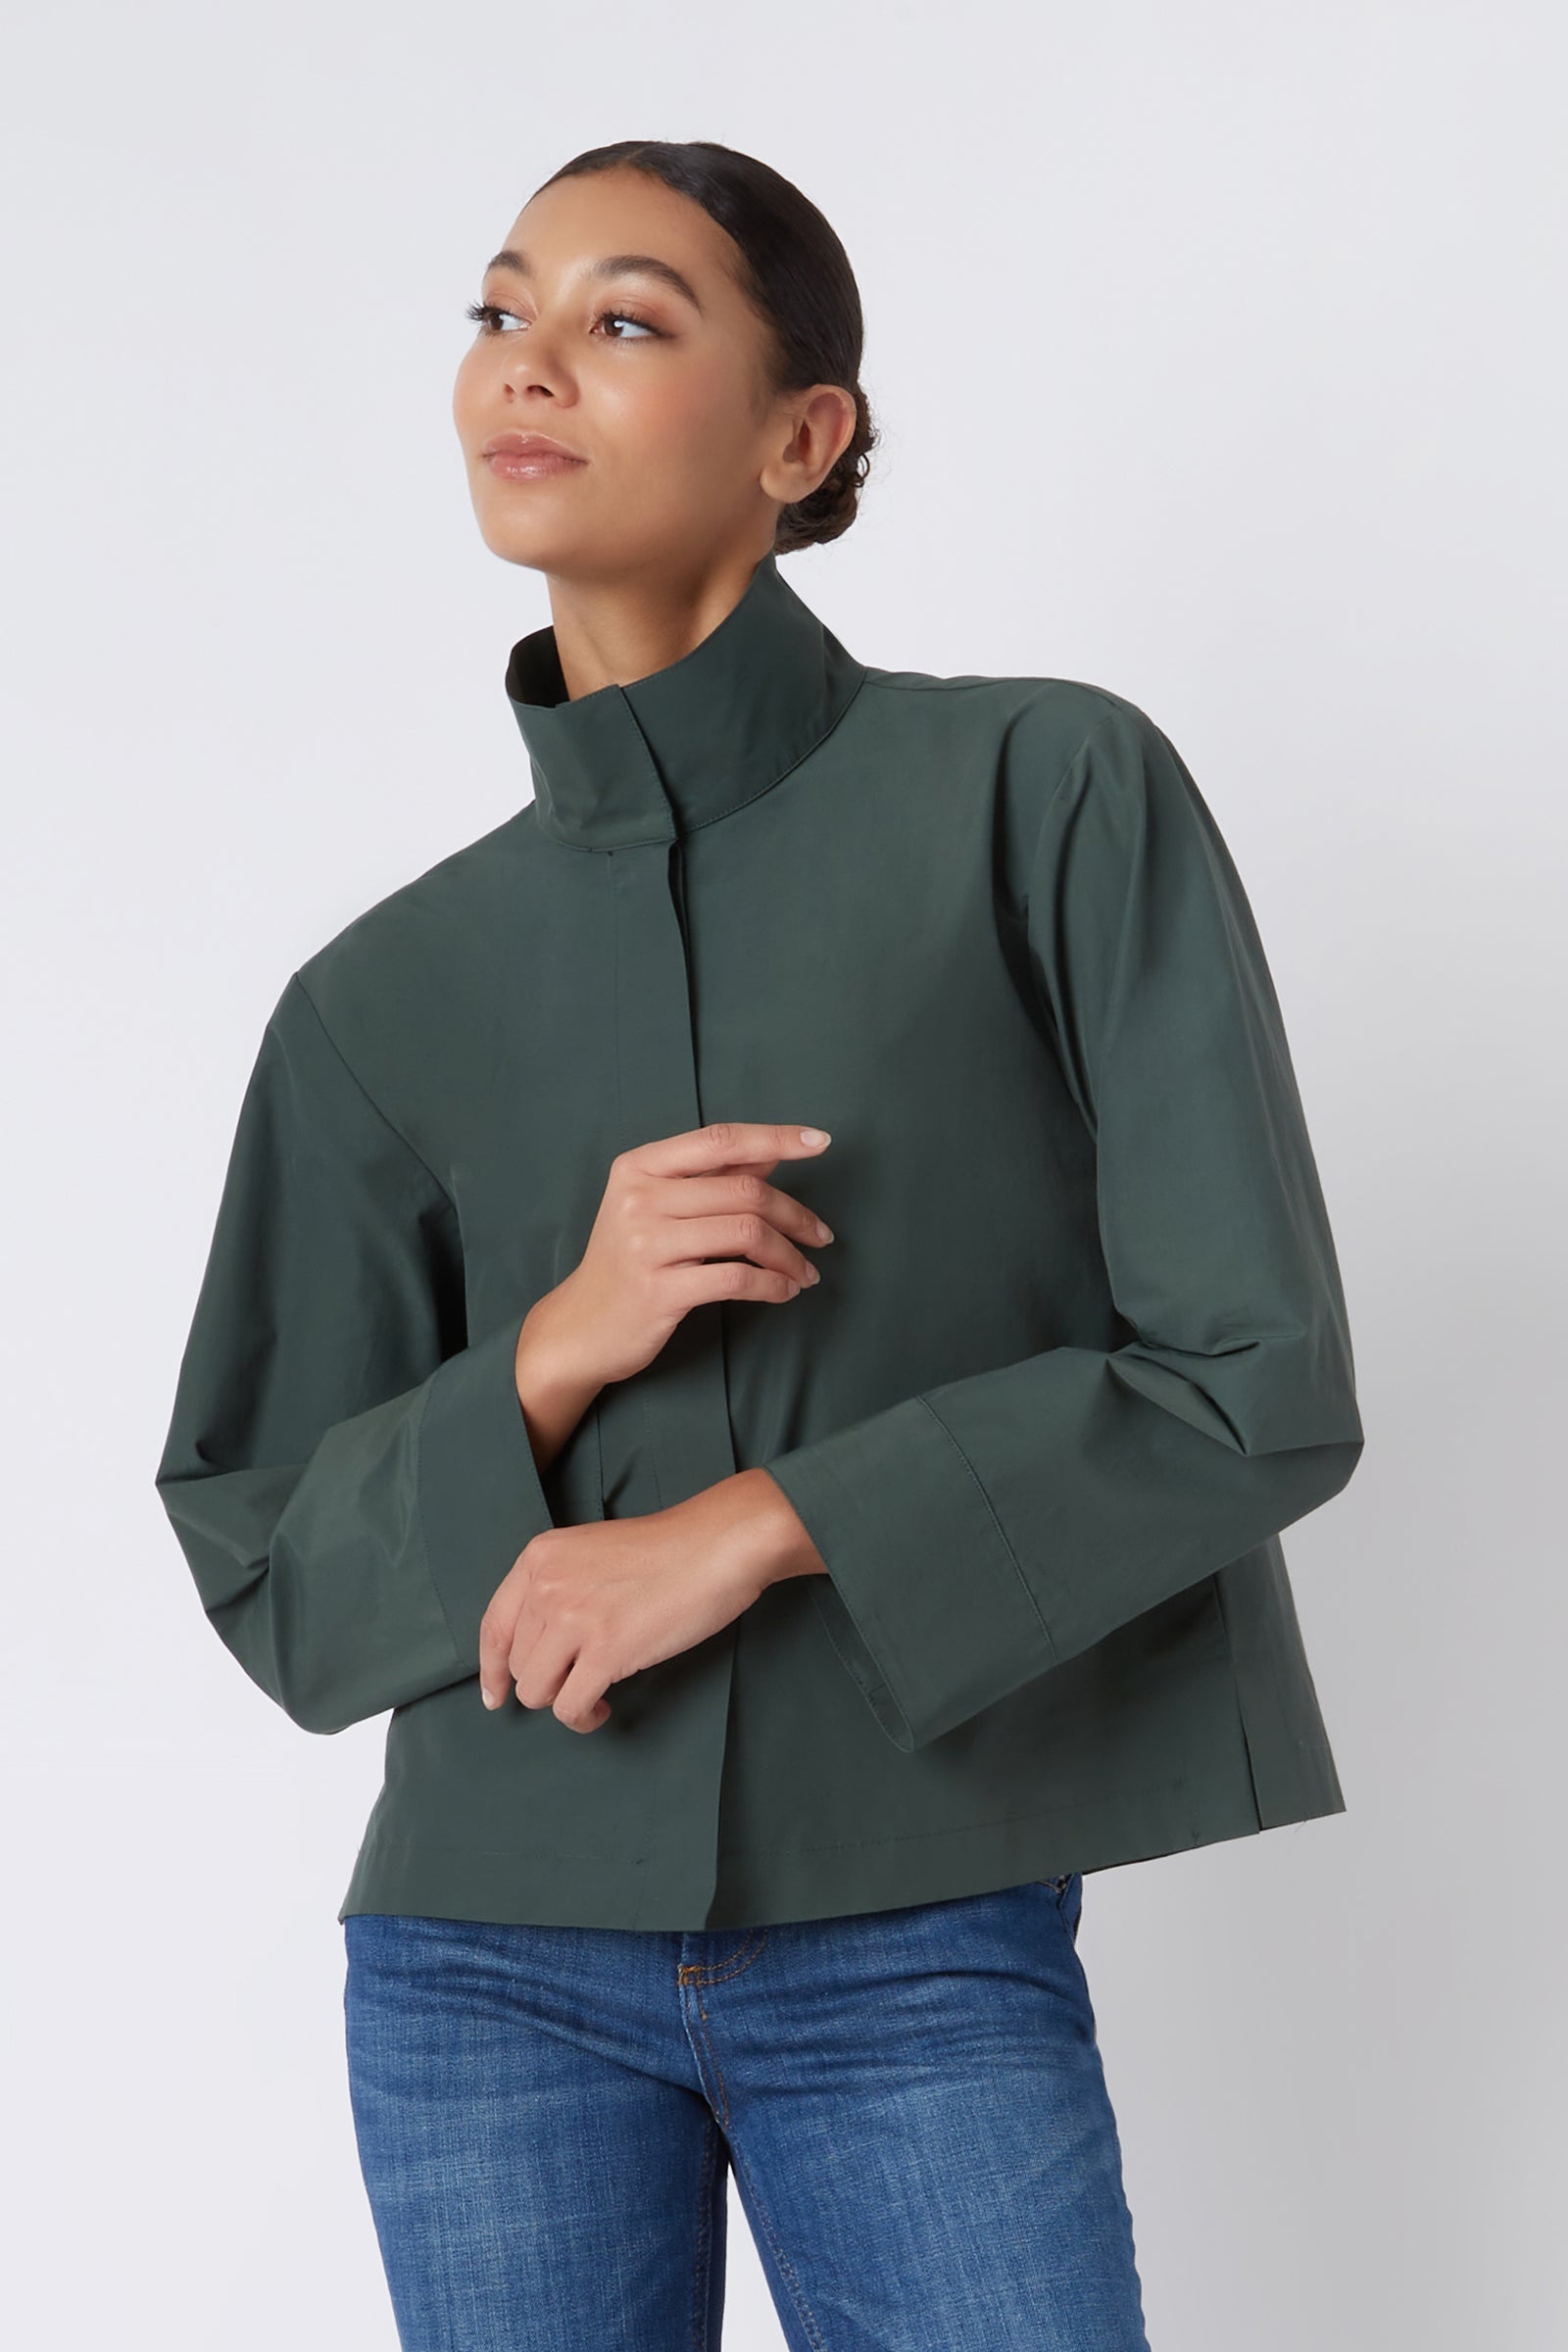 Kal Rieman Peggy Collared Shirt in Loden Broadcloth on Model Looking Right Cropped Front View